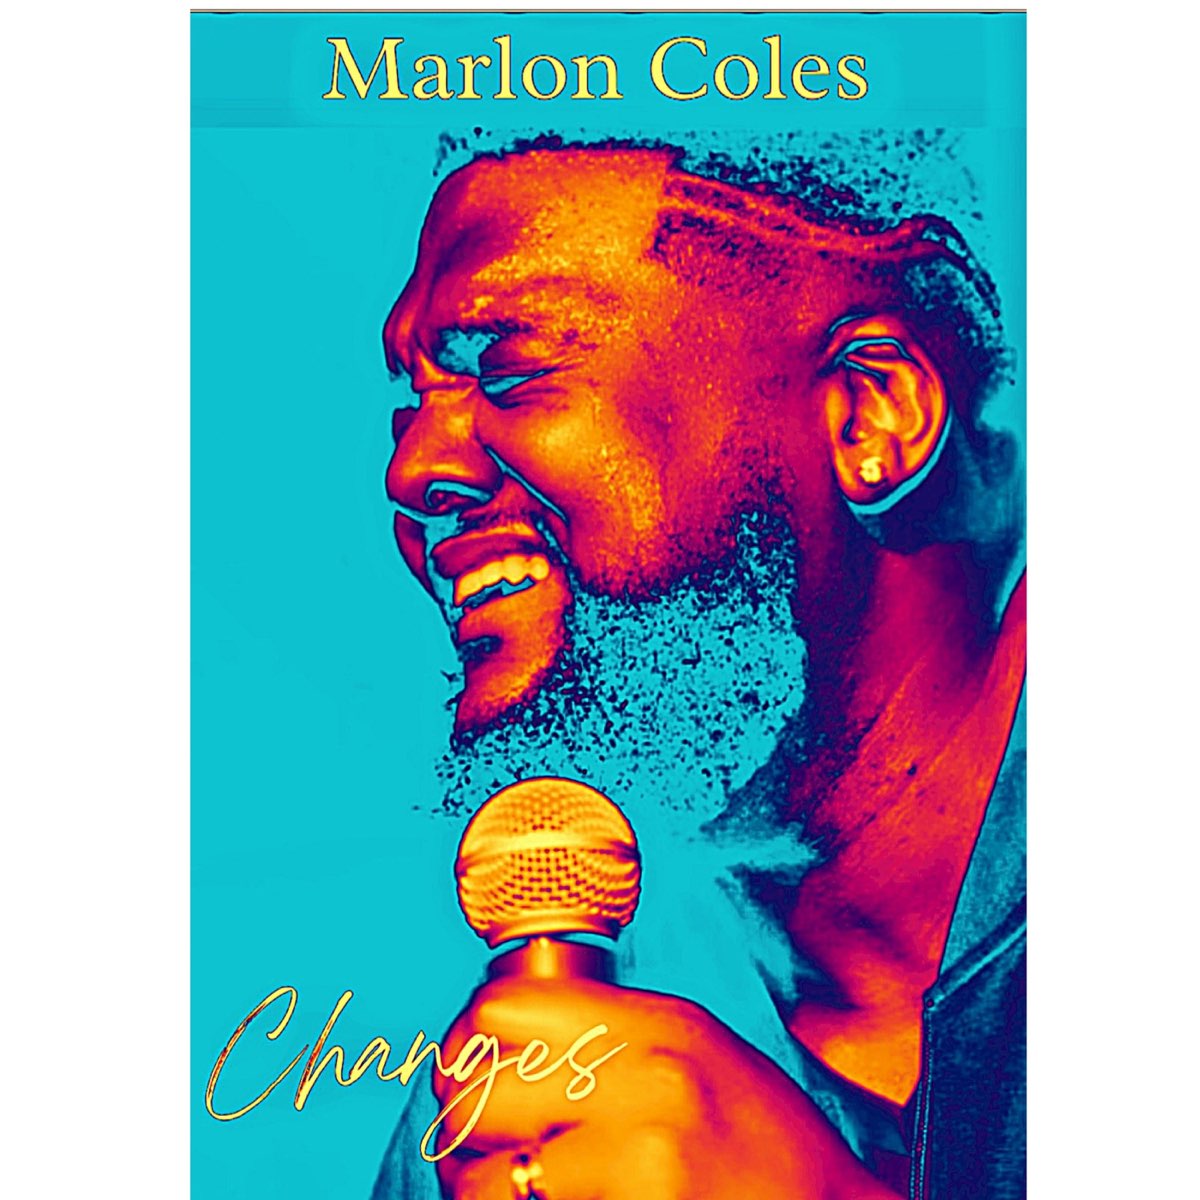 Changes - Single by Marlon Coles on Apple Music